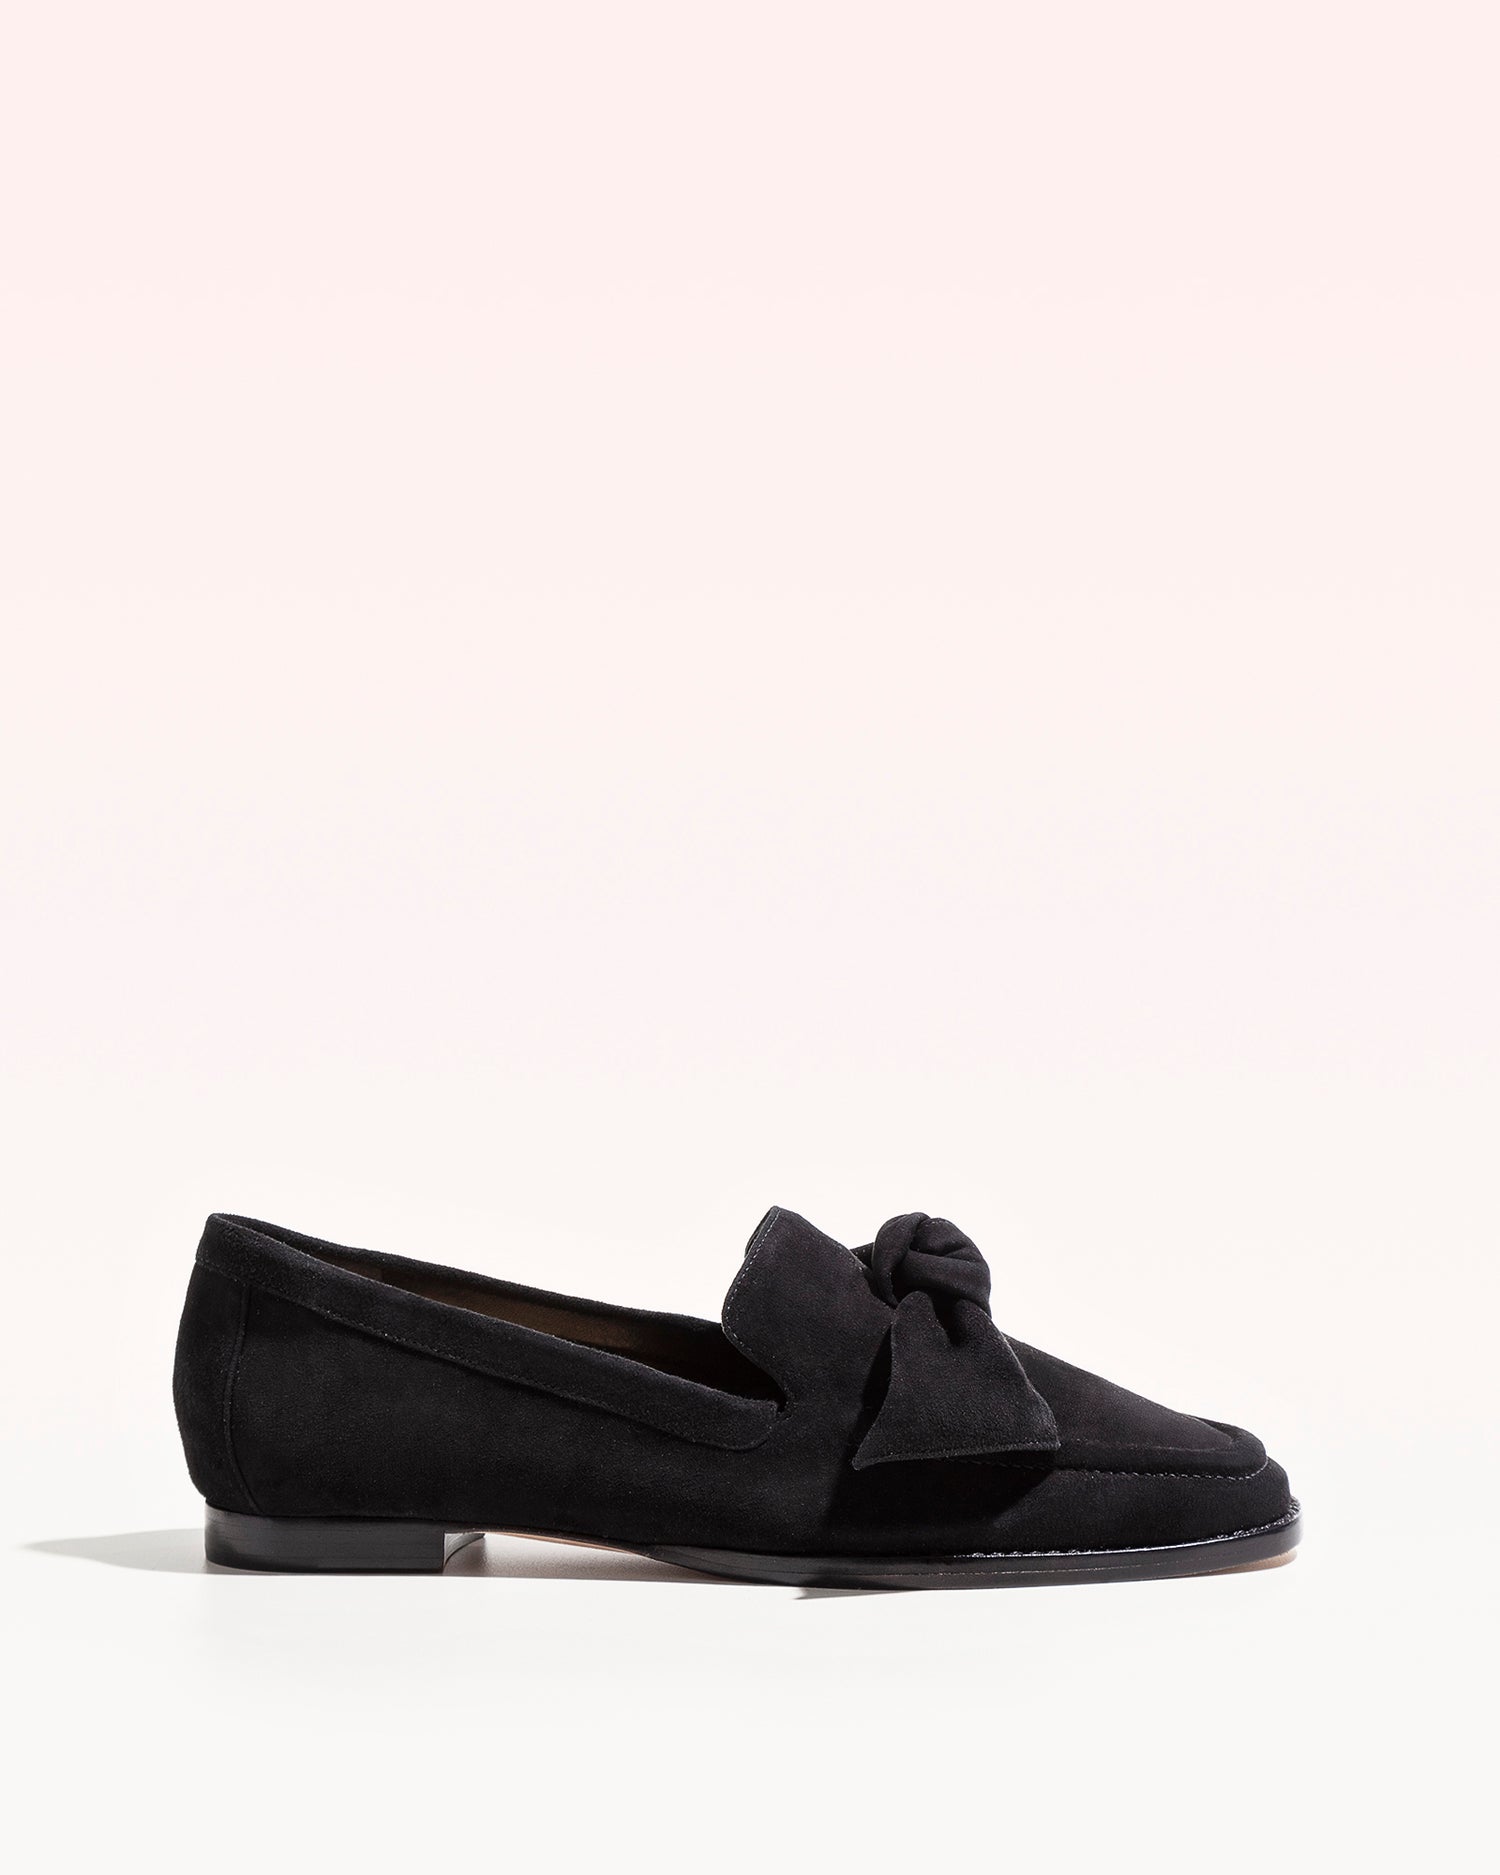 Clarita Loafer Suede Black Loafers Fall 21 35 Black Suede